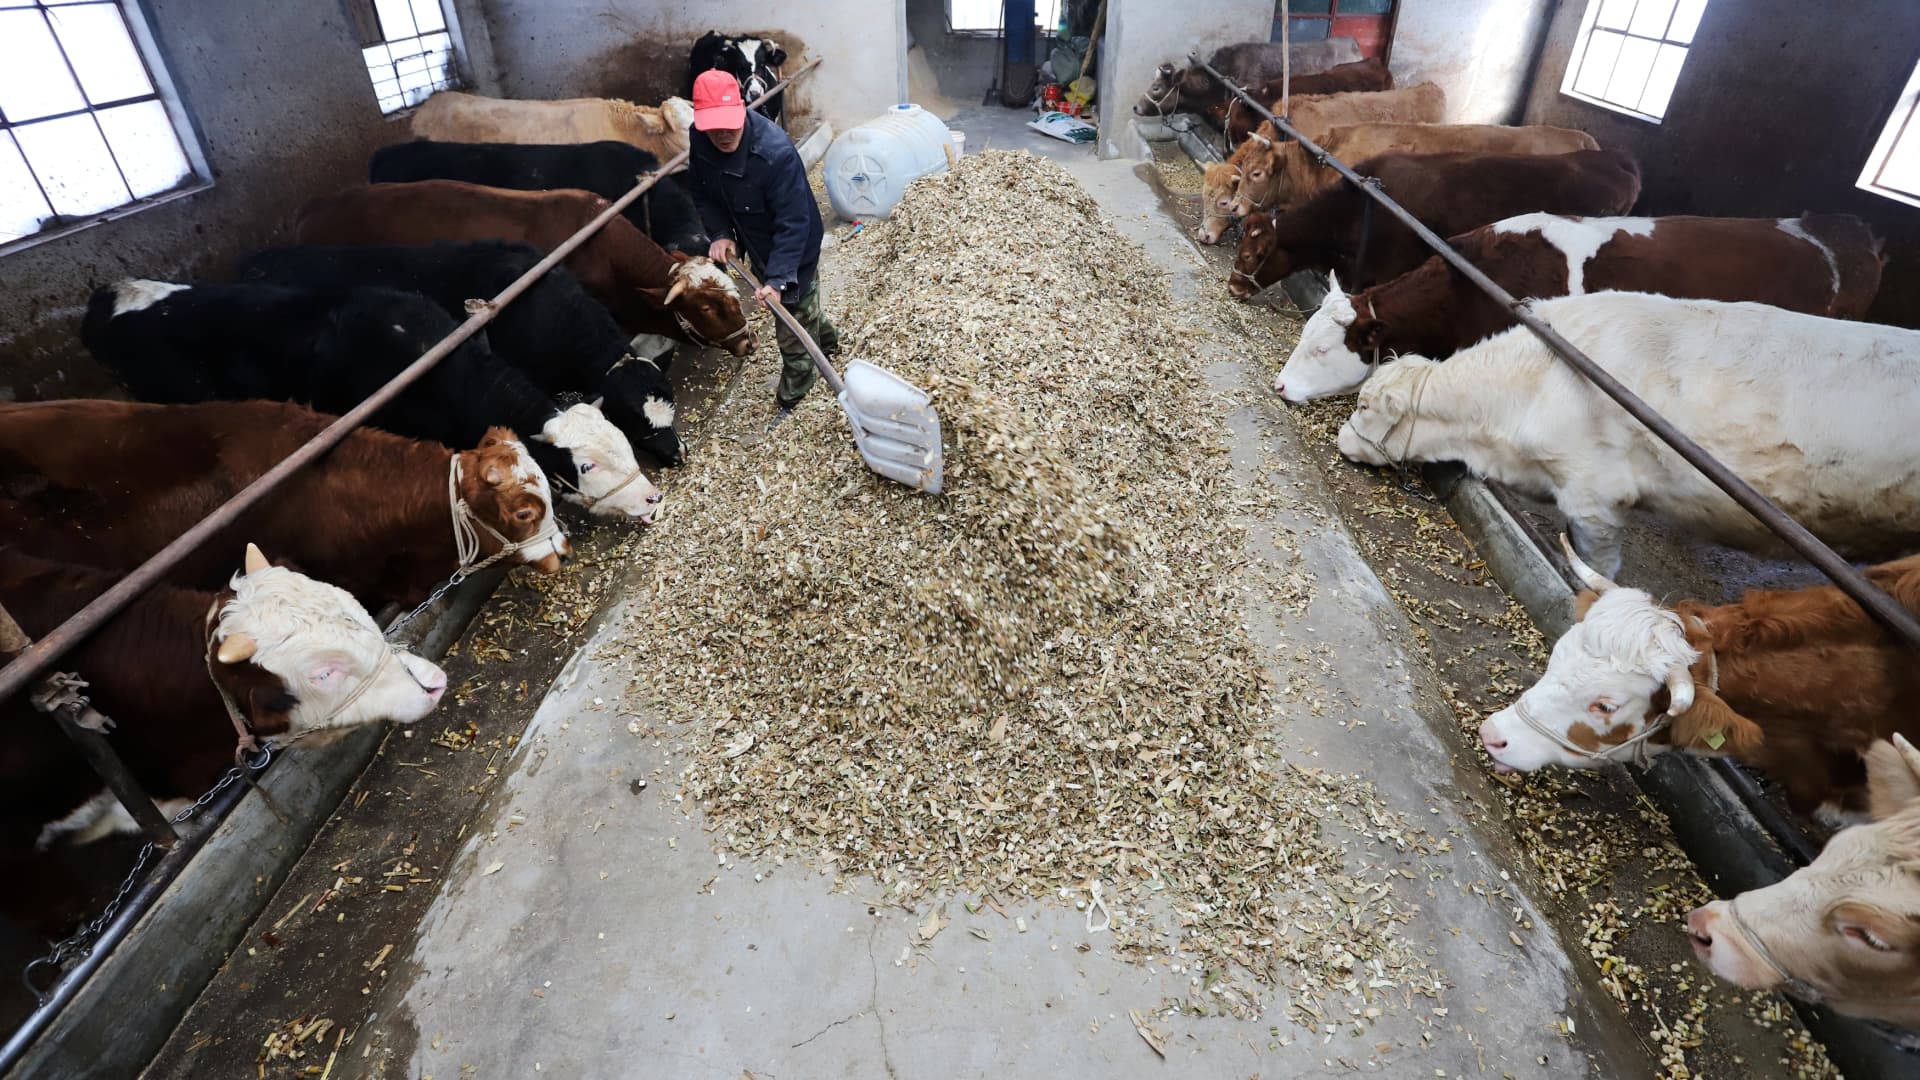 Cattle feeding at a cattle farm on December 13, 2020 in Pingliang, Gansu Province of China. Cattle feed is commonly made up of corn, wheat, rice and oats, amongst other grains, a lot of which saw large spikes in the middle of last year and remain notched at heightened levels.